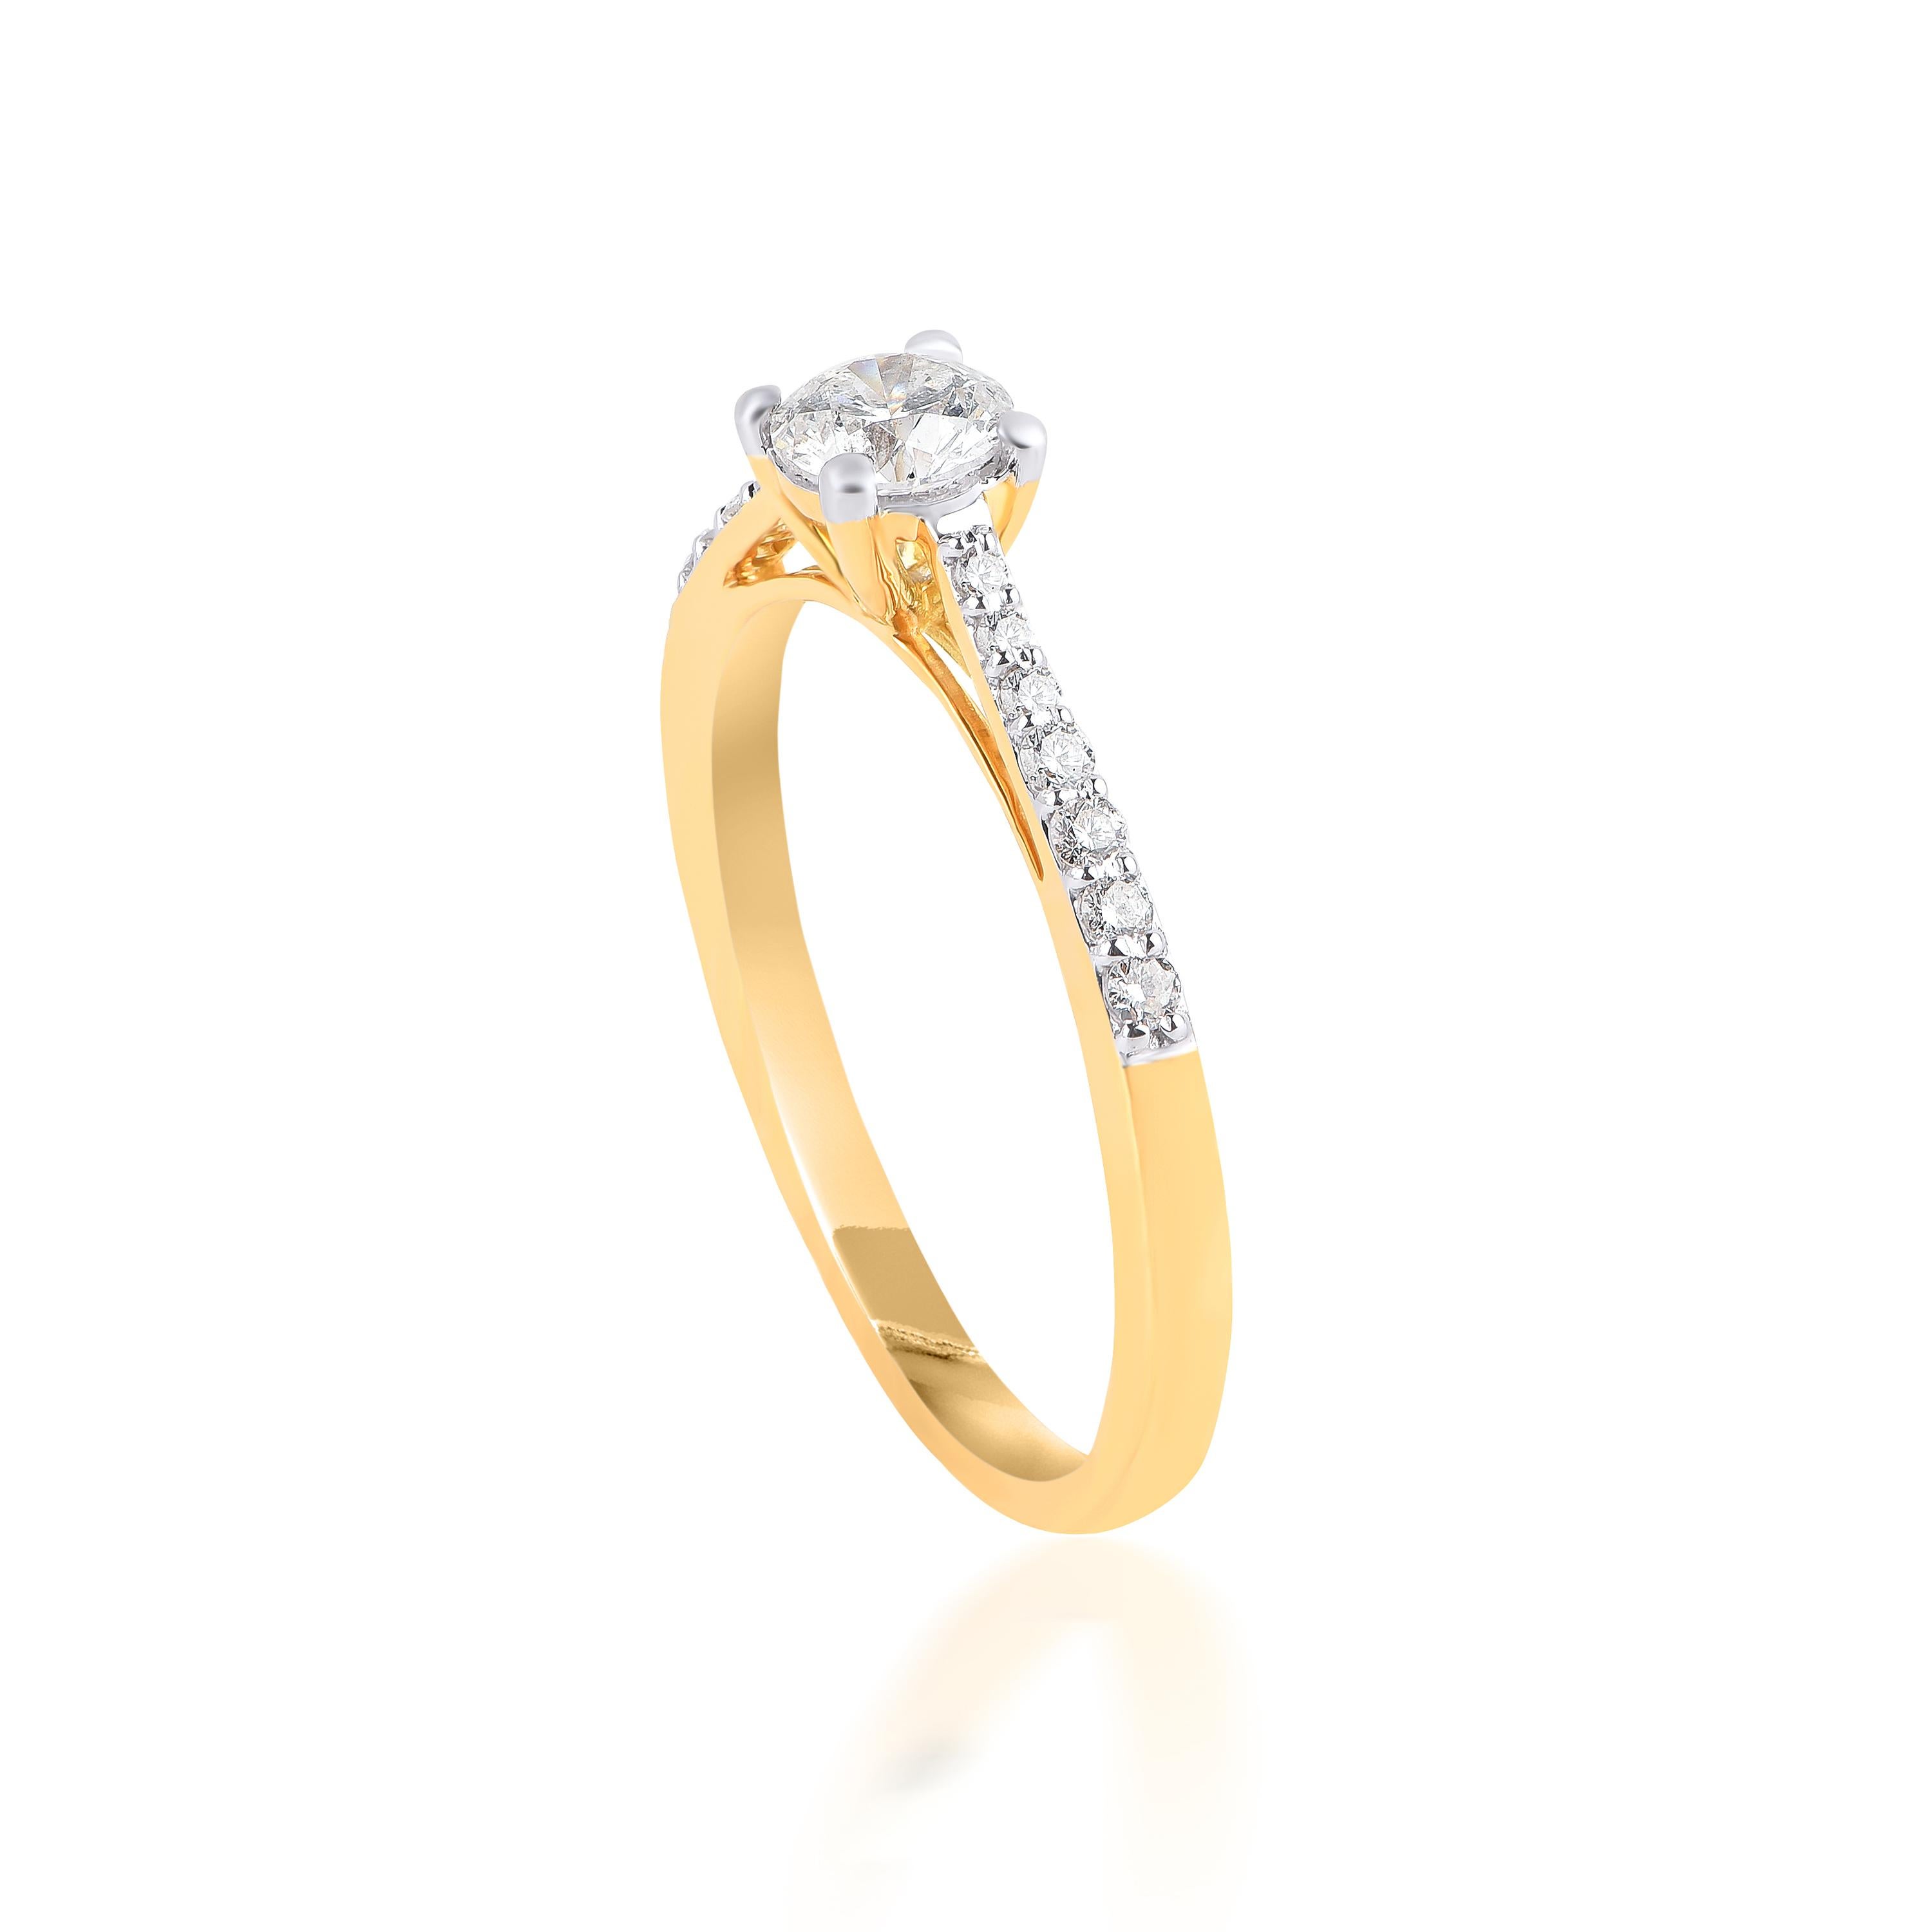 This wedding ring is studded with 15 brilliant-cut diamonds in prong and micro-pave setting and beautifully crafted in 18-karat yellow gold. The diamonds are graded H-I Color, I2 Clarity.